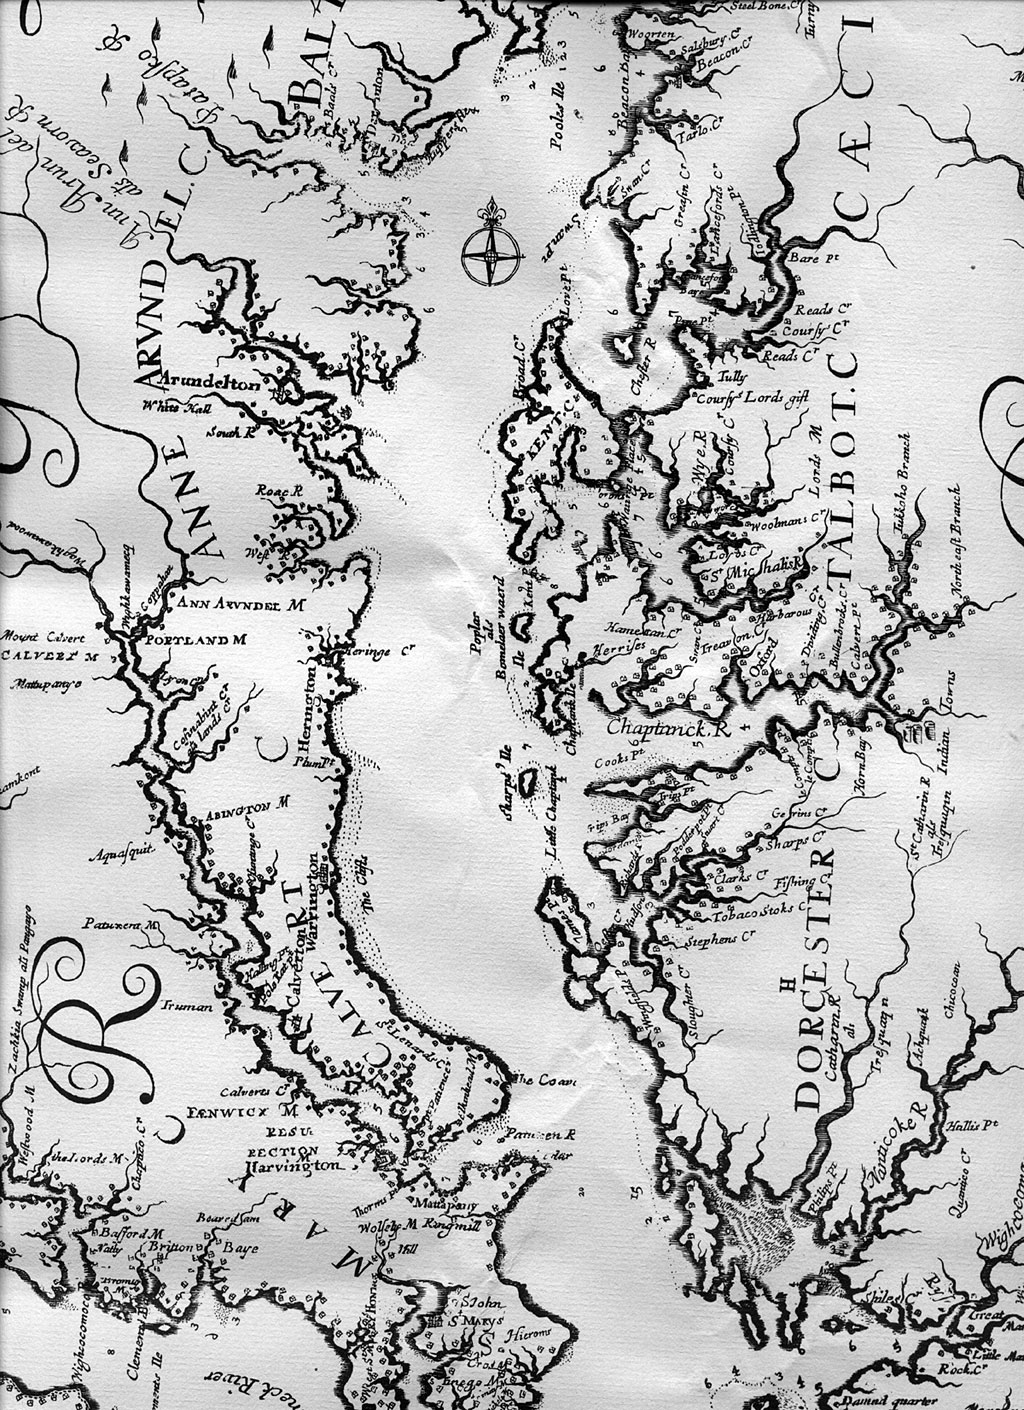 Chesapeake Bay from Virginia and Maryland 1670